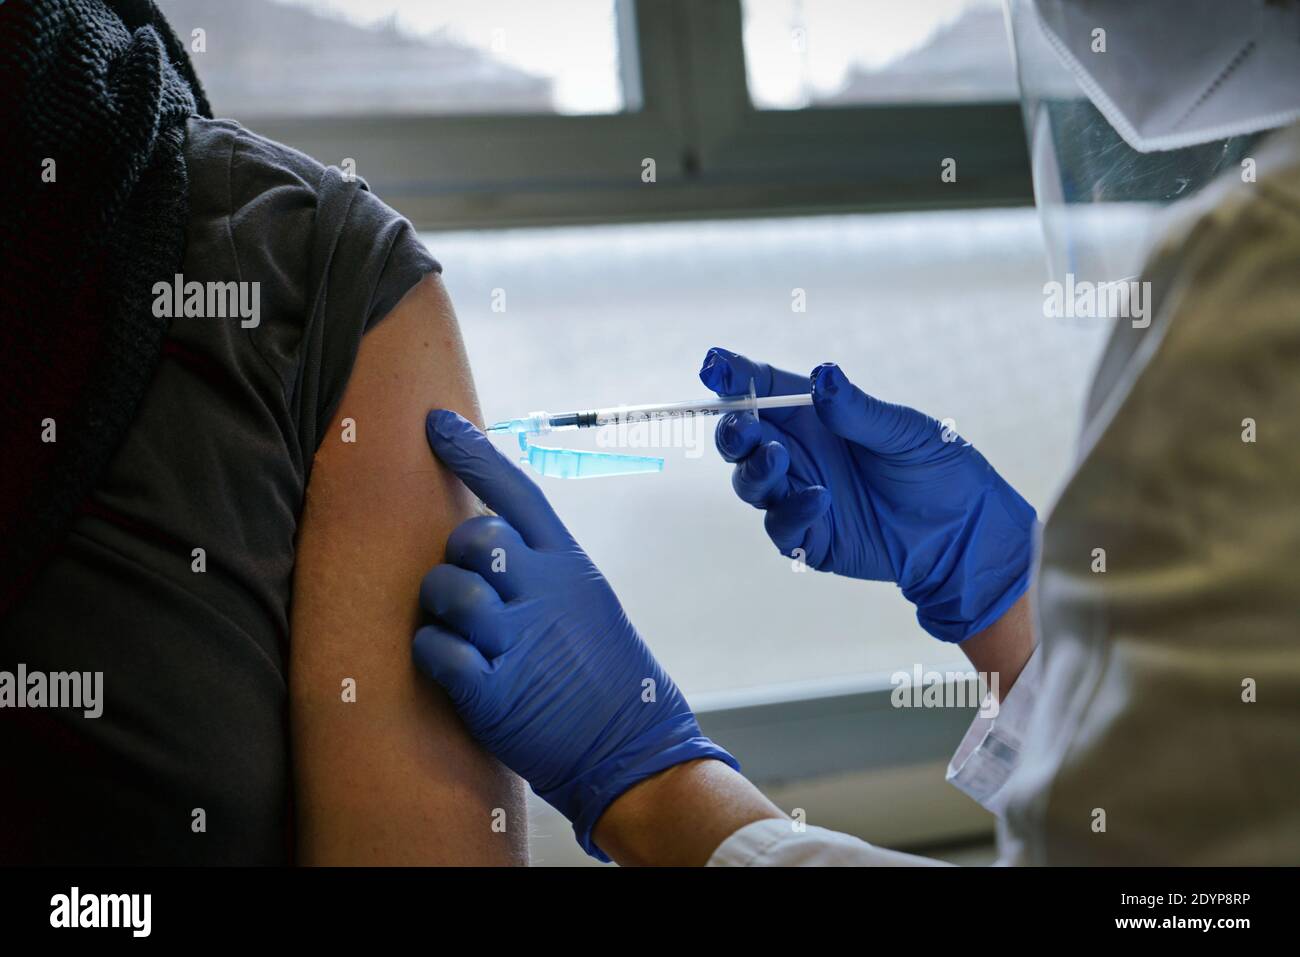 Start Of Vaccination Against Covid-19, a person receives the Pfizer's coronavirus vaccine, at the Amedeo di Savoia Hospital. Turin, Italy - December 2 Stock Photo